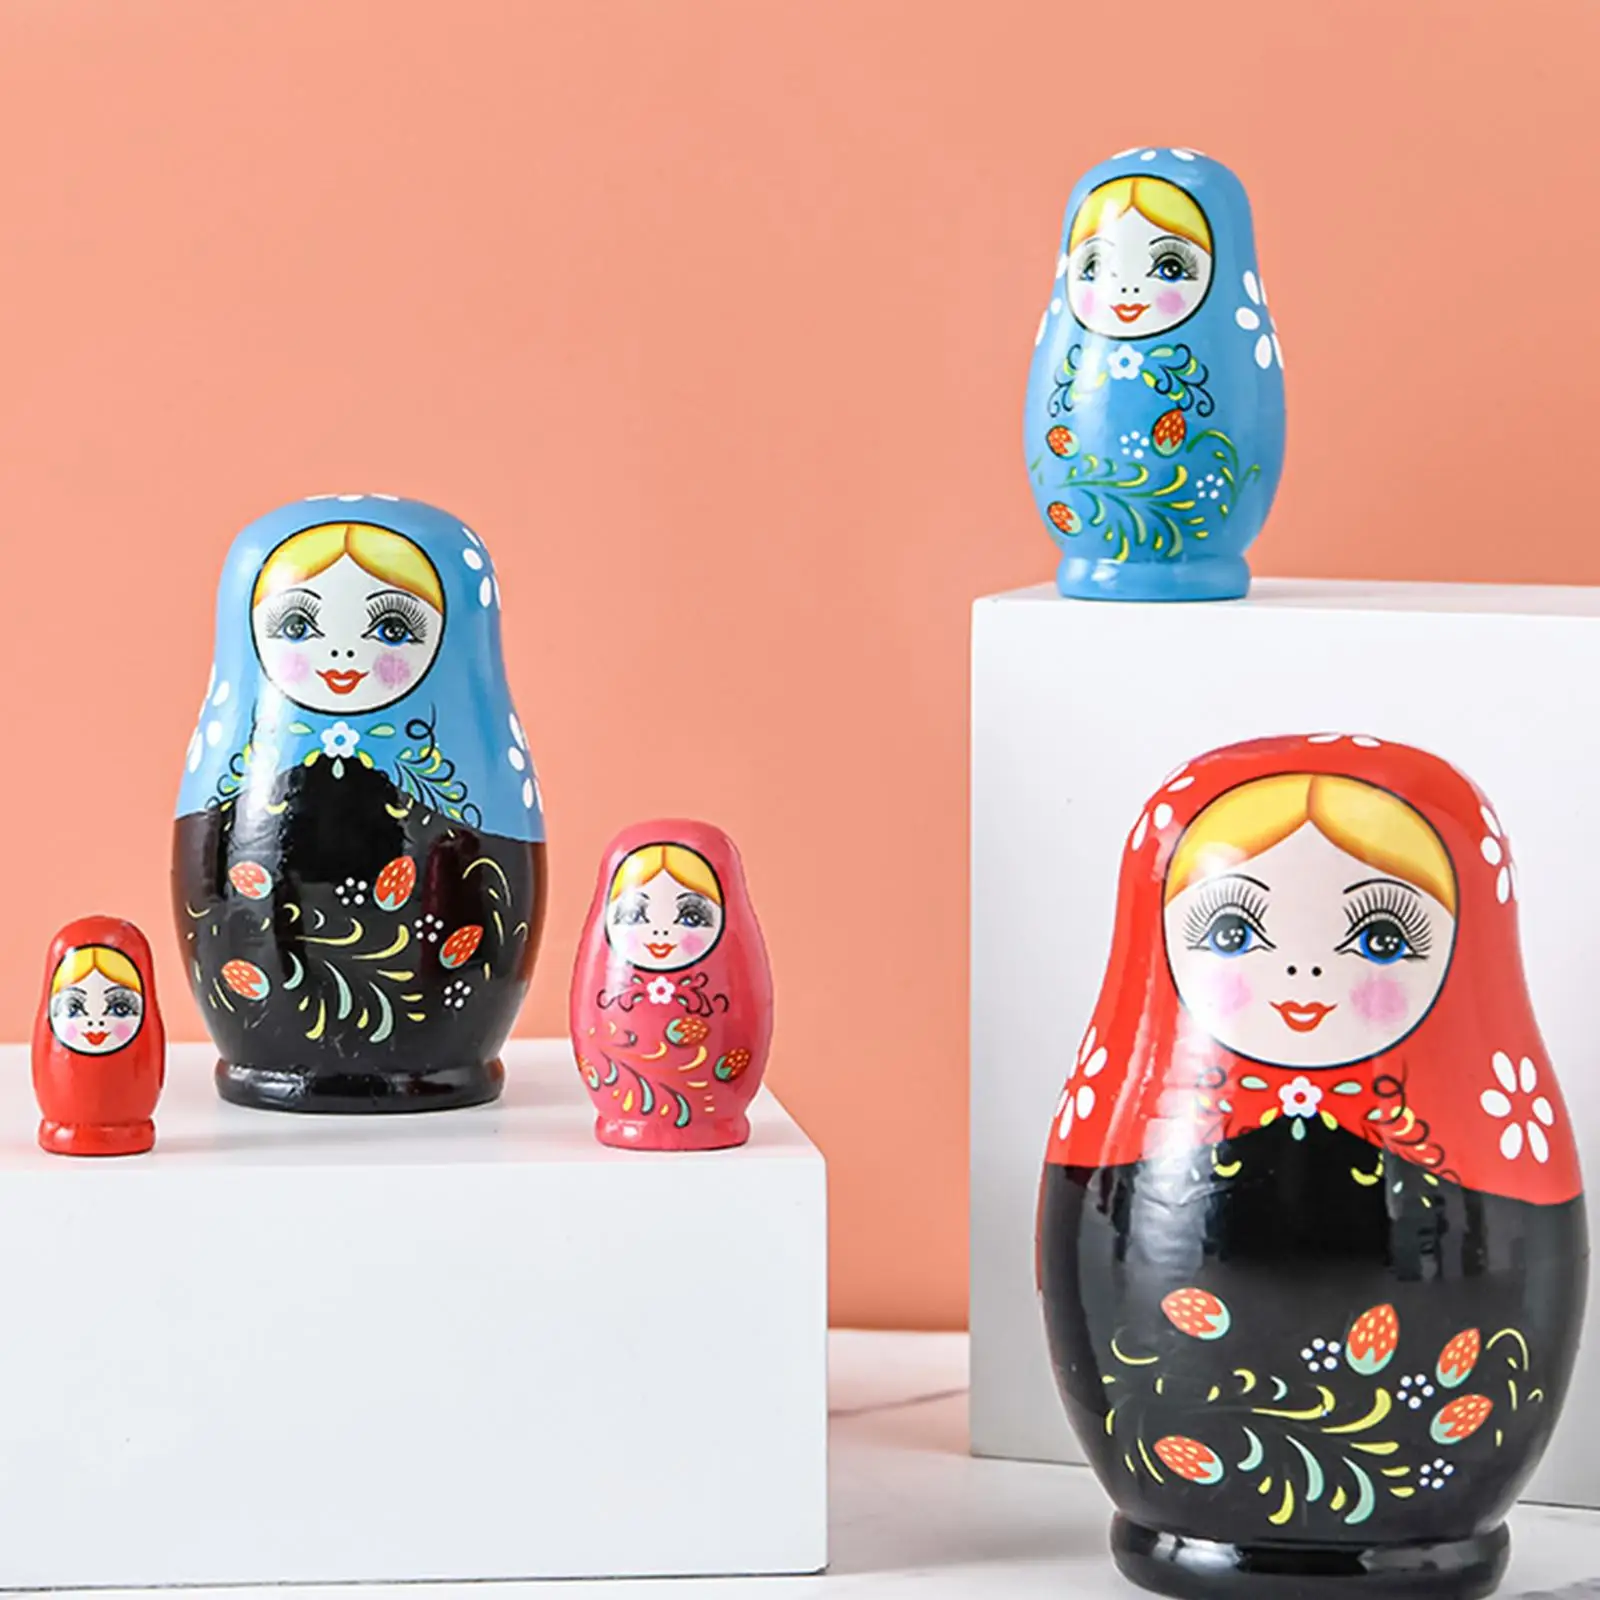 5 Pieces Handmade Russian Matryoshka Nesting Dolls Stacking Toys Wood Crafts for Kids Girls New Year Gift Home Decor